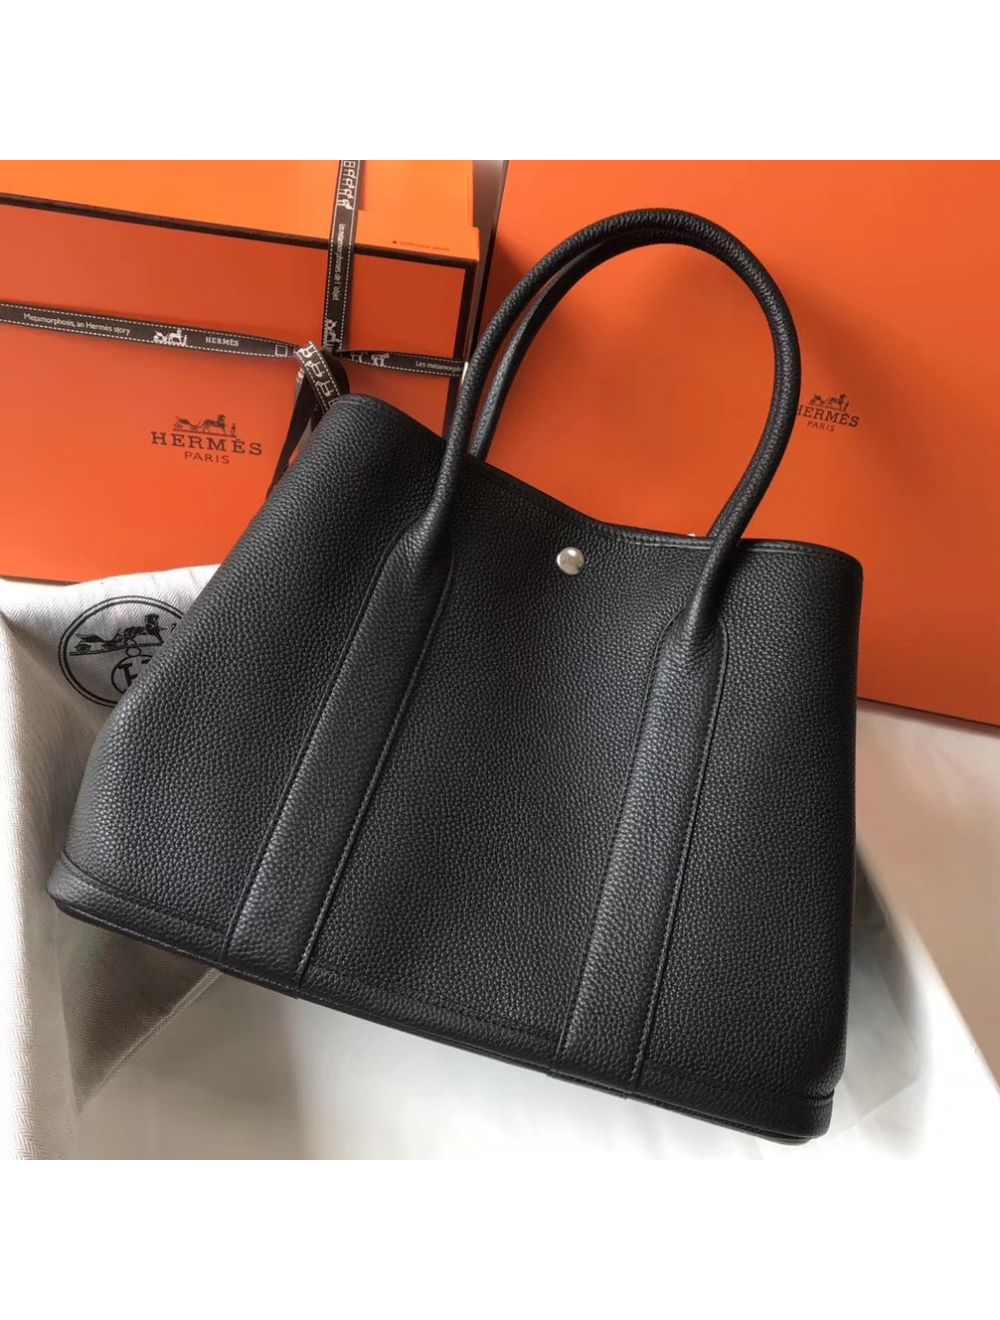 Replica Hermes Garden Party 36 Bag In Black Clemence Leather